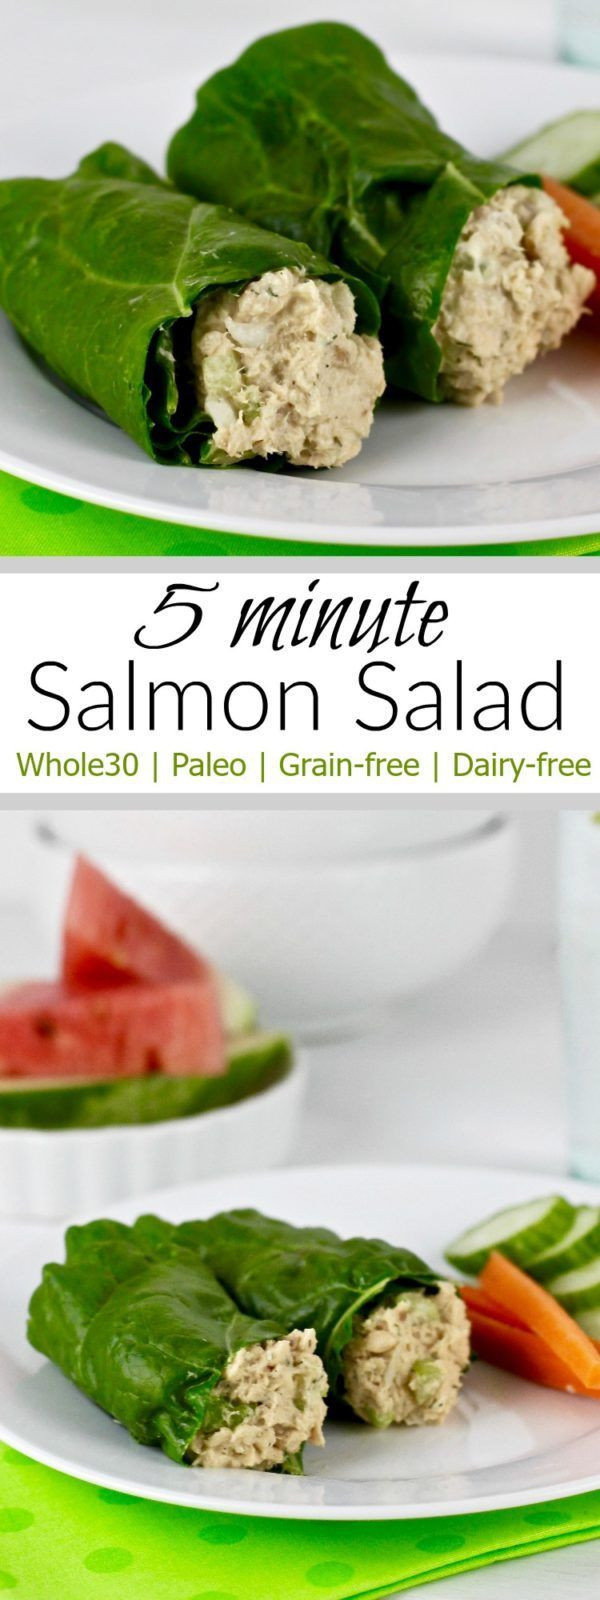 Canned Salmon Salad Recipes Healthy
 Best 25 Canned salmon salad ideas on Pinterest